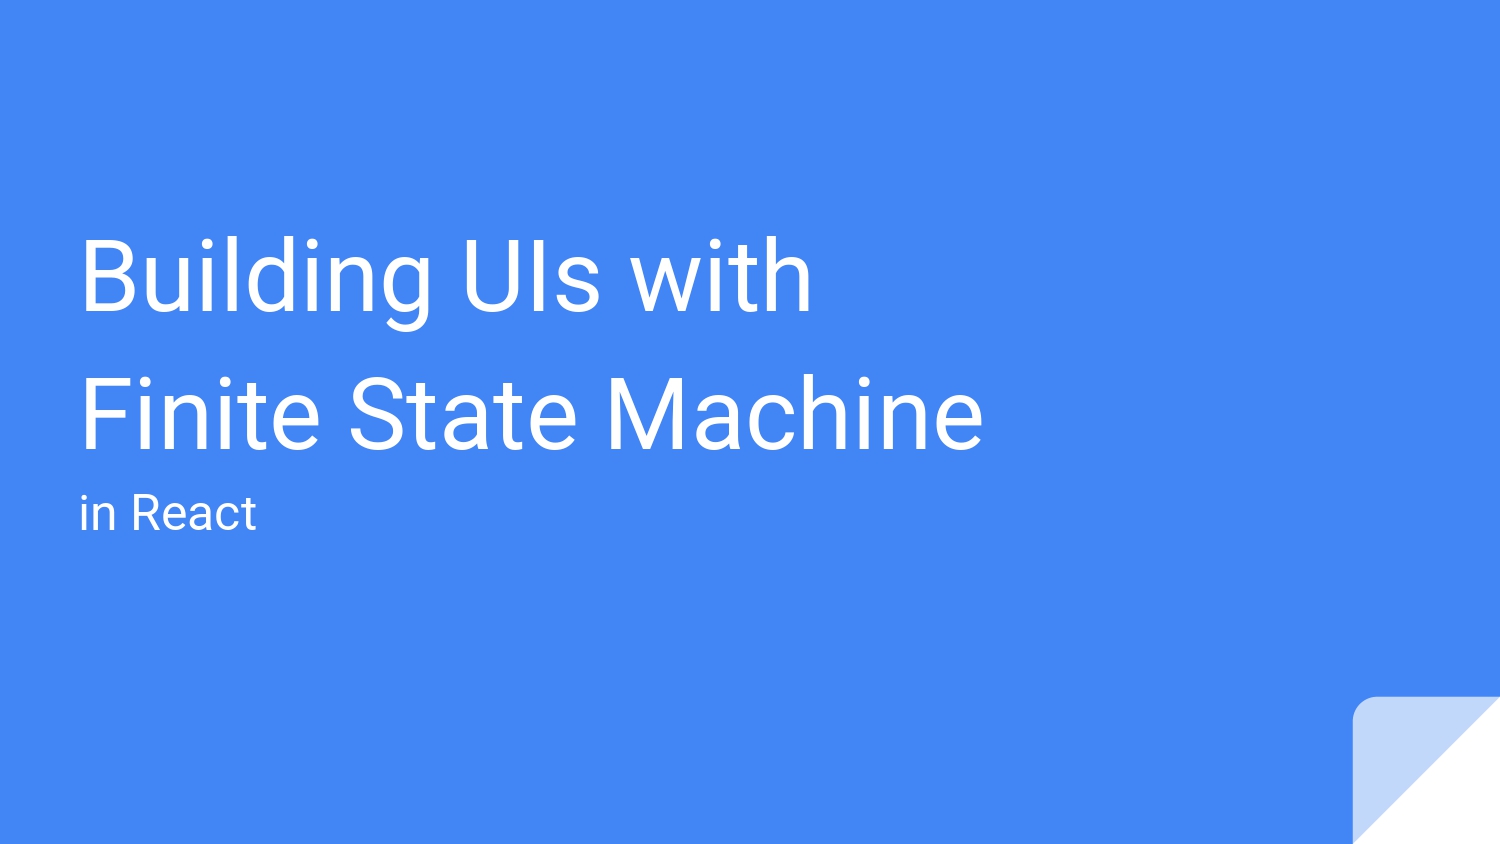 Building UIs with Finite State Machine